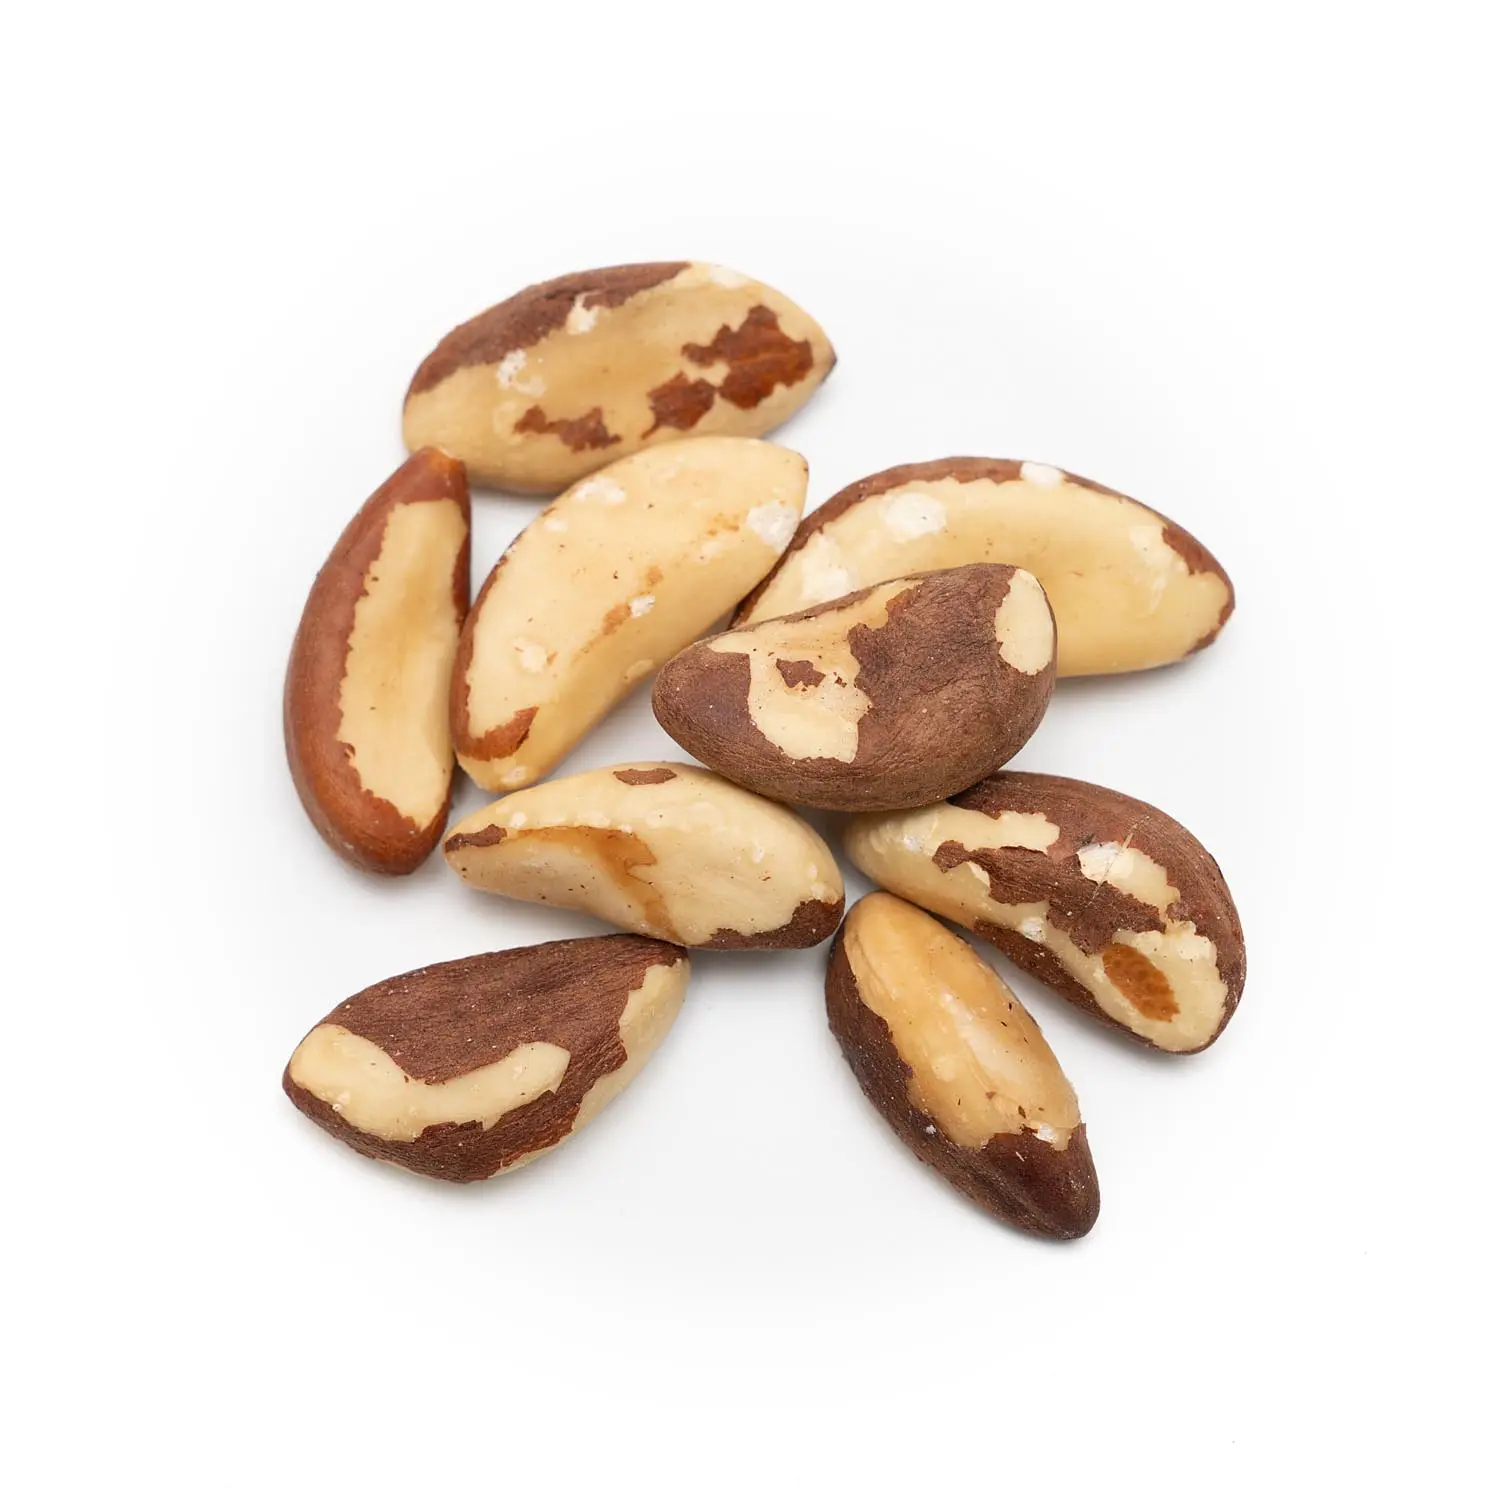 Wholesale Premium Organic Toasted Brazil Nuts With Shell for Snacks